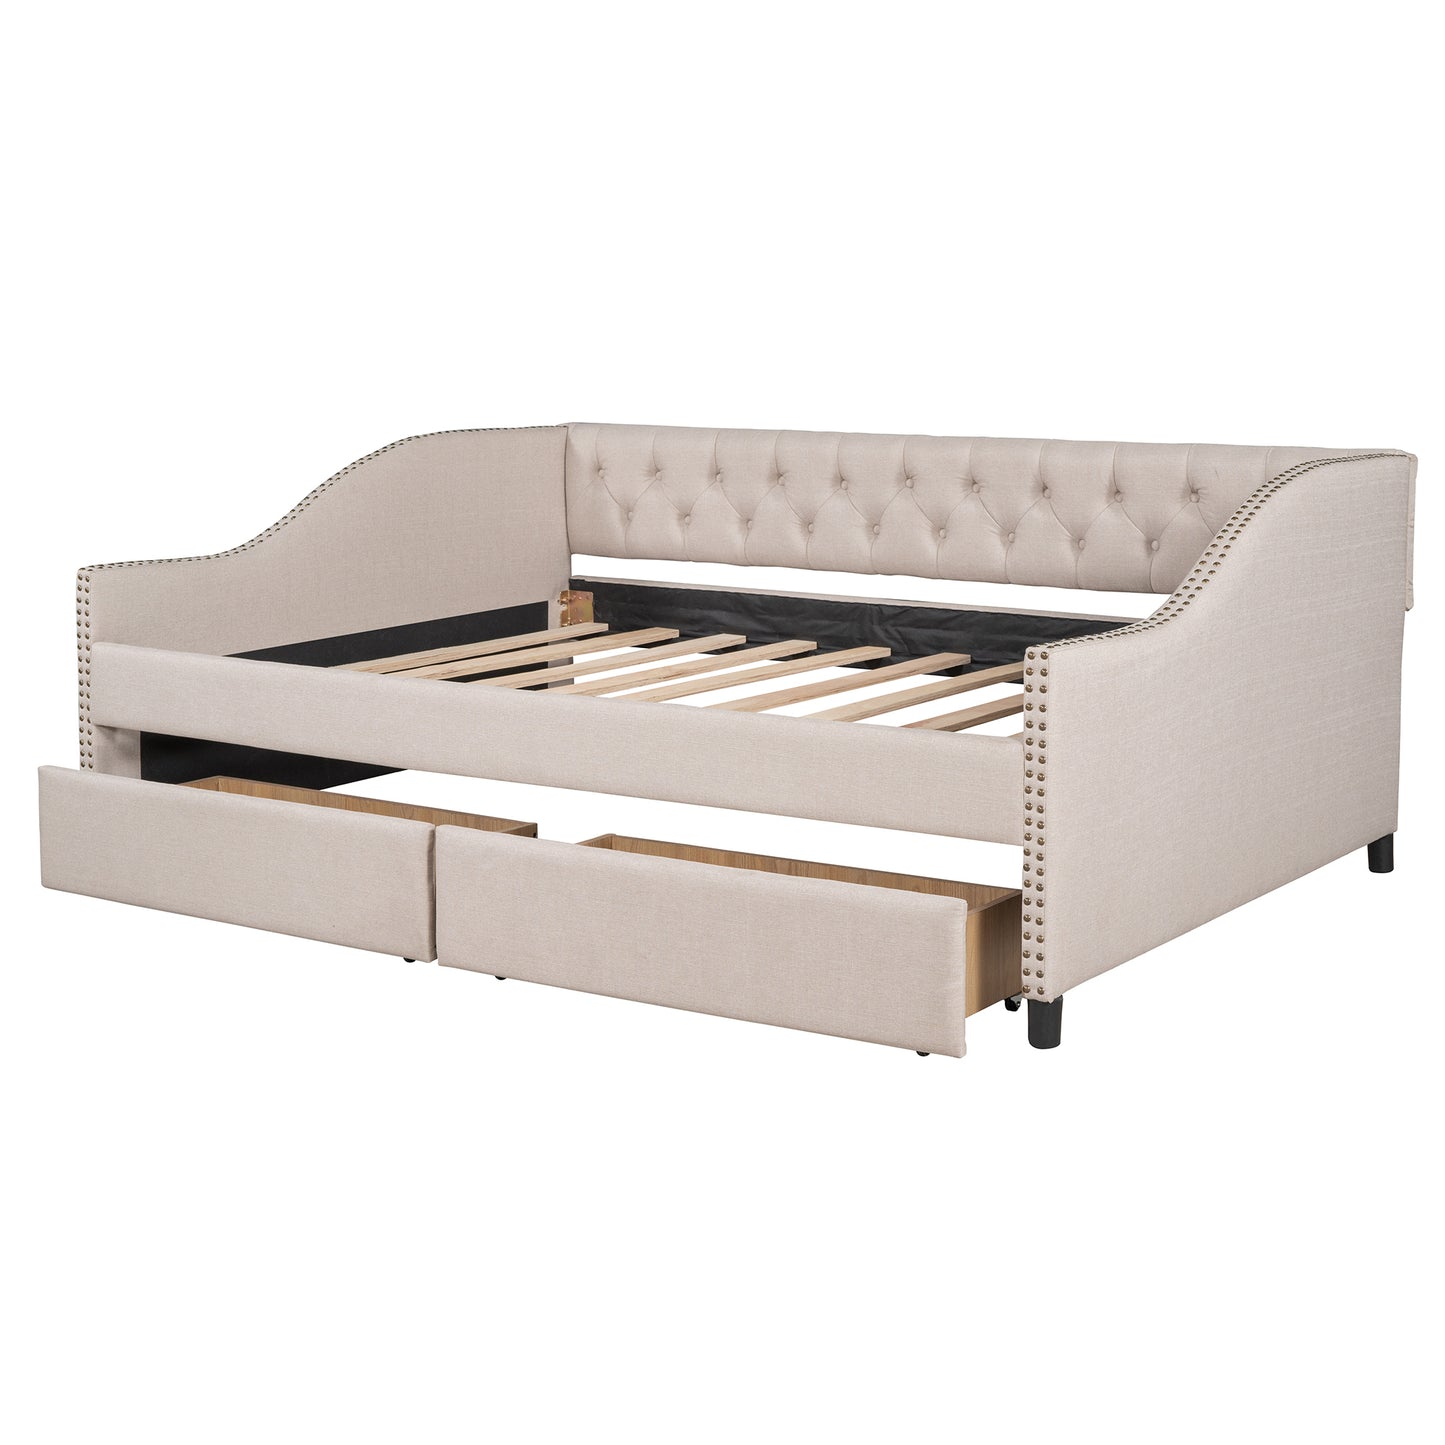 Upholstered daybed with Two Drawers, Wood Slat Support, Beige, Full Size